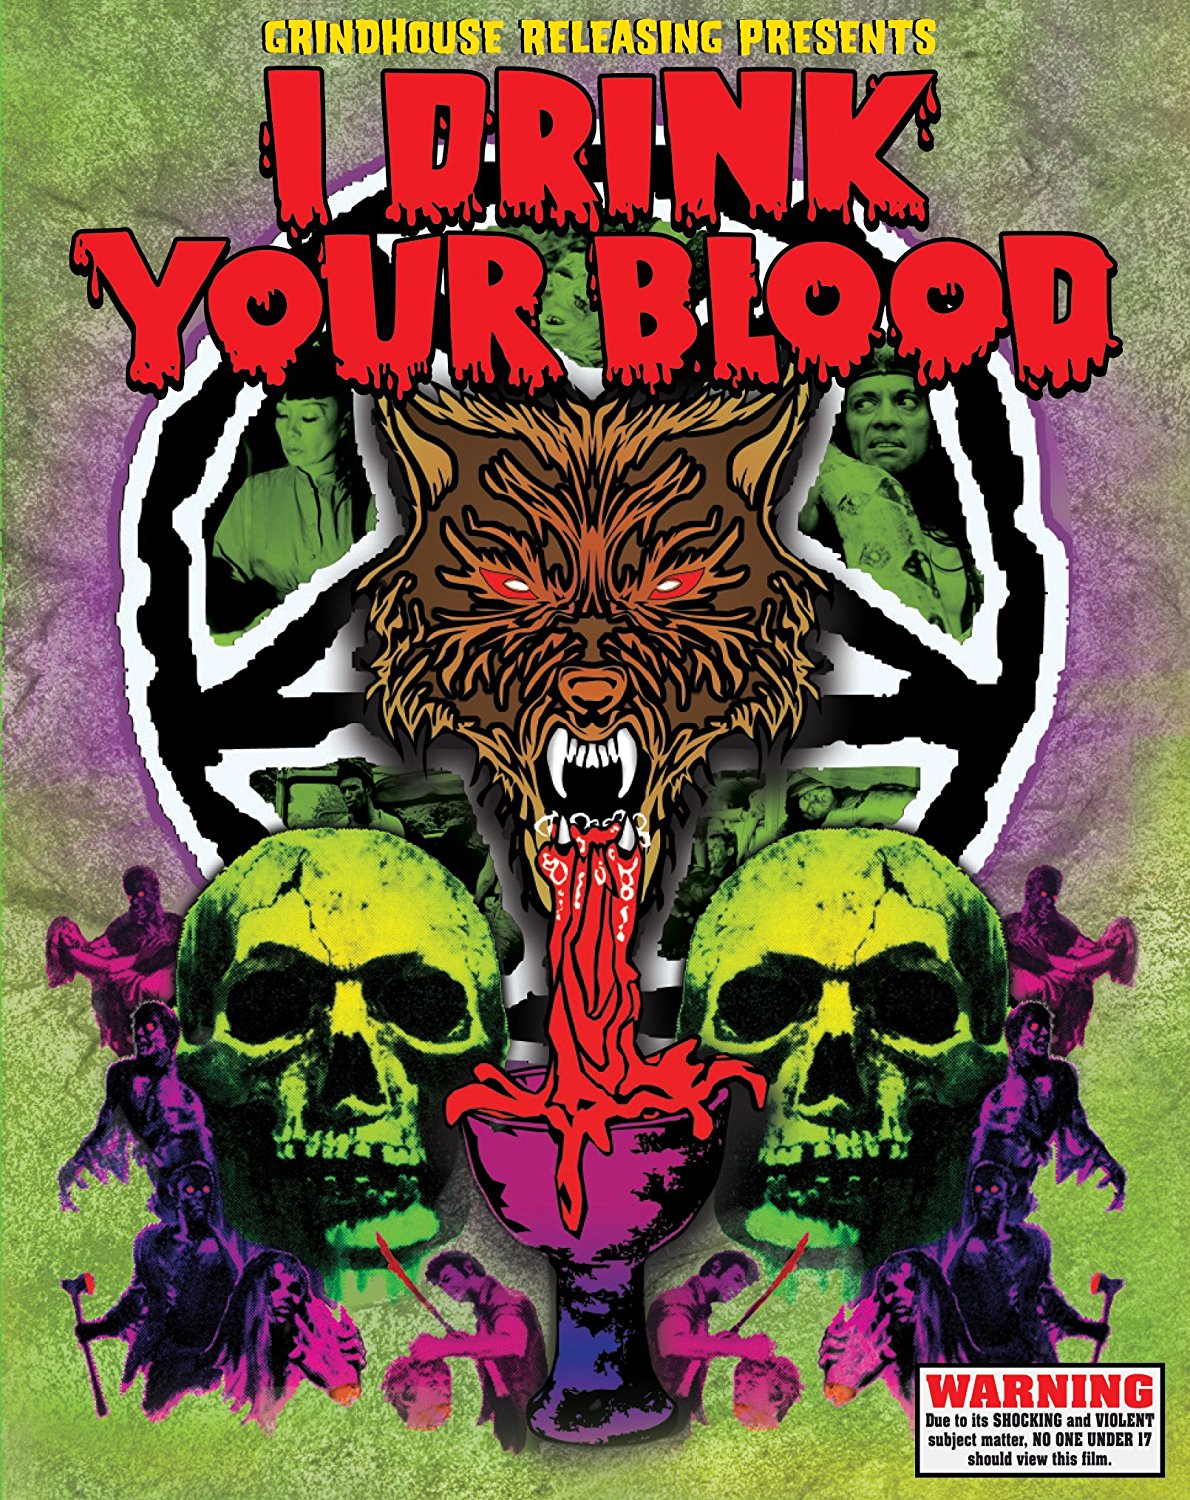 I DRINK YOUR BLOOD cover art